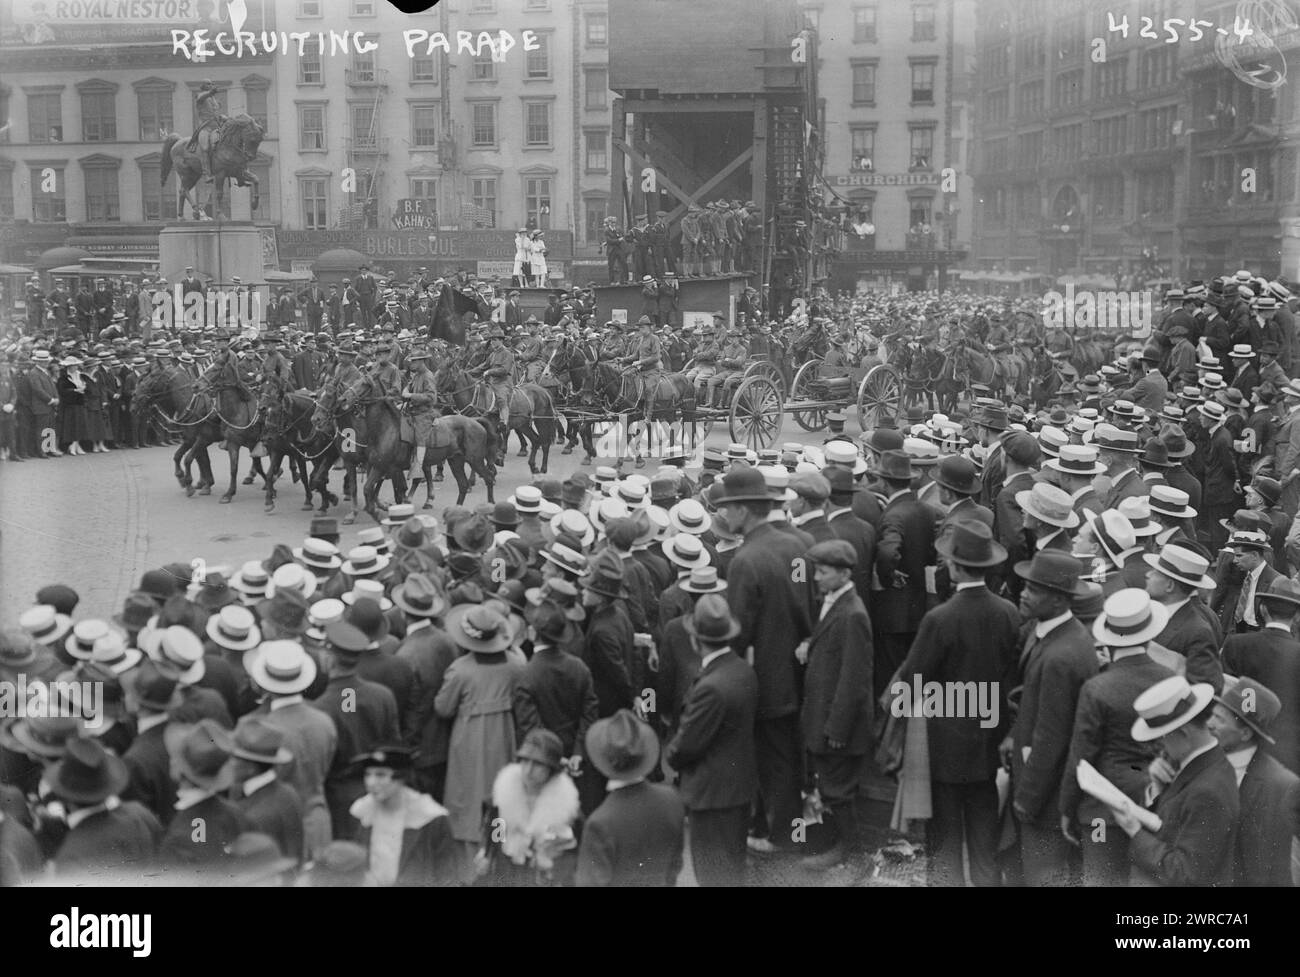 Recruiting Parade, Photograph shows a parade during World War I in Union Square, New York City., 1917, World War, 1914-1918, Glass negatives, 1 negative: glass Stock Photo